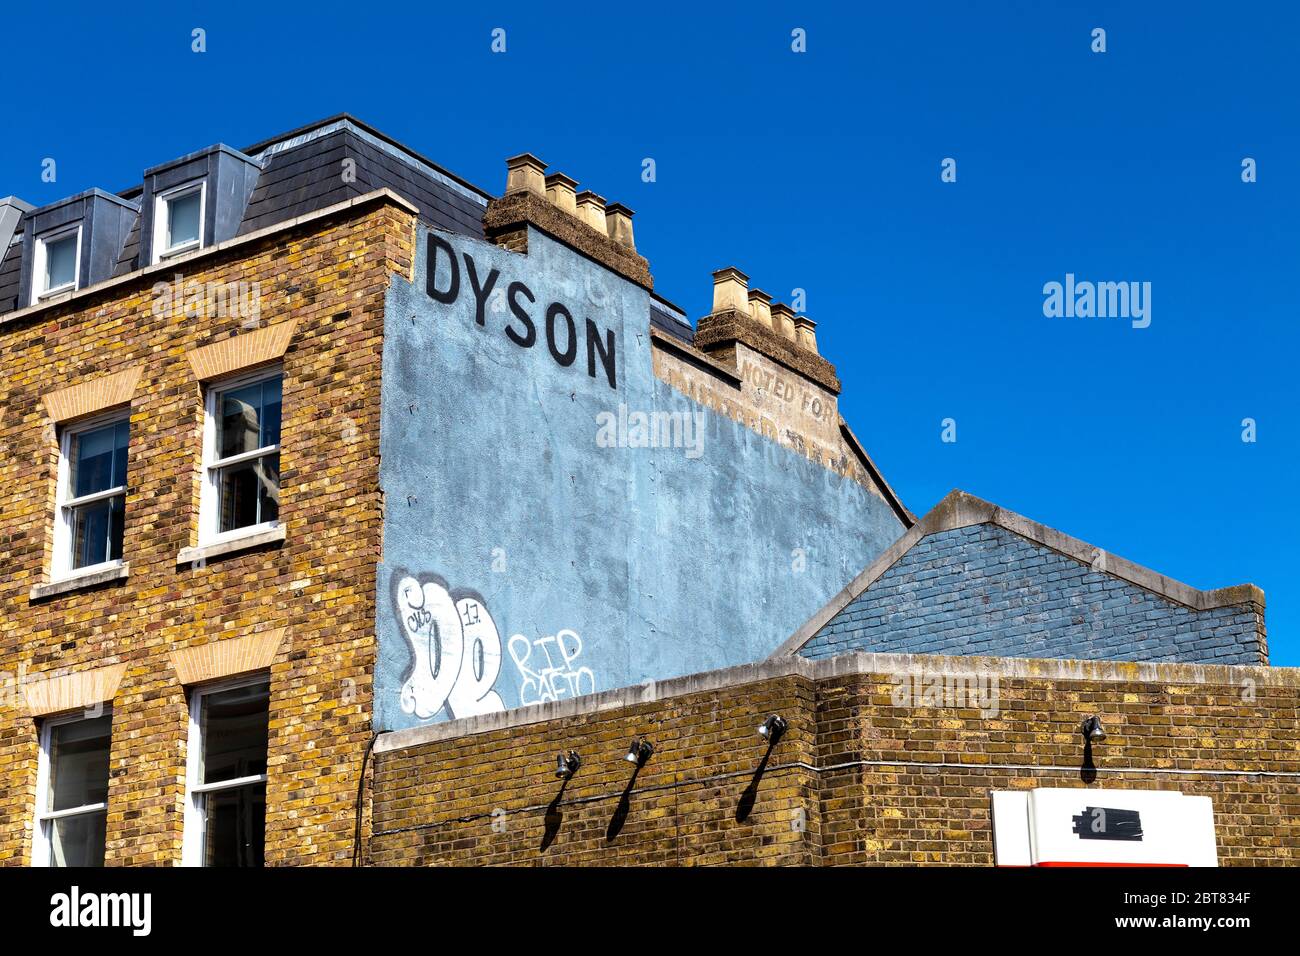 Mural saying Dyson at the side of a yellow brick building in Dalston, London, UK Stock Photo